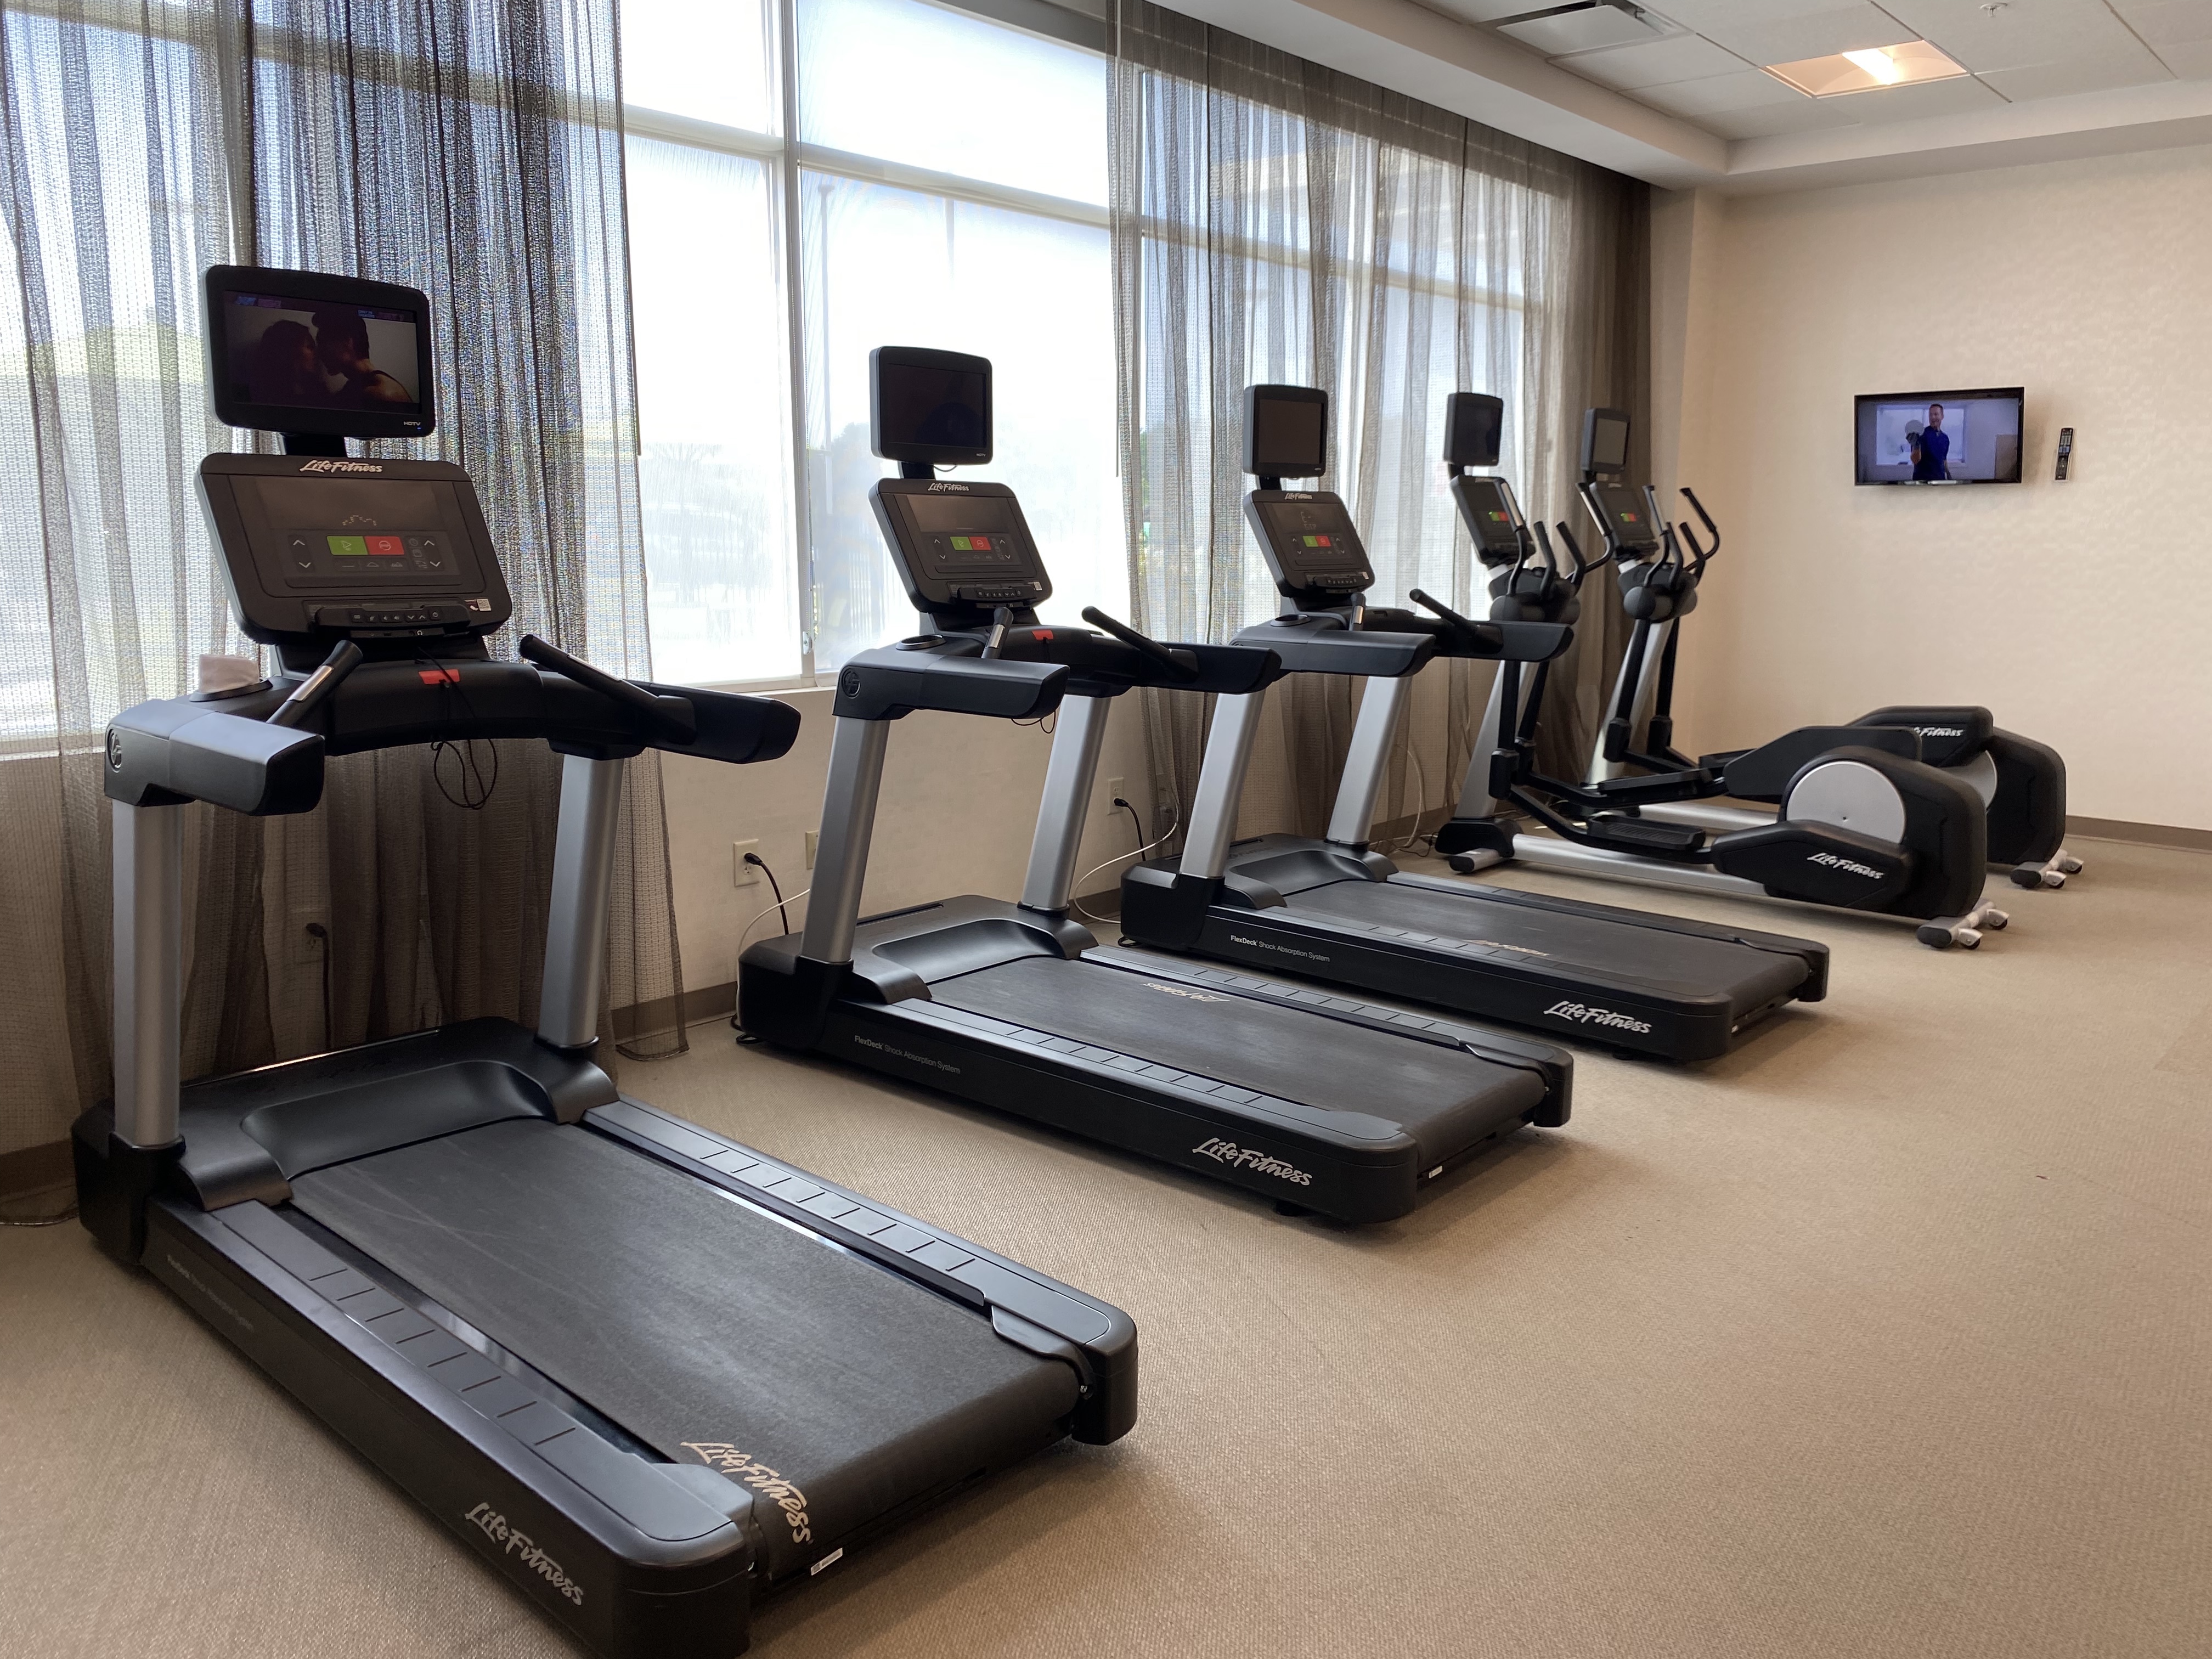 This is the
      fitness room, showing the treadmills.